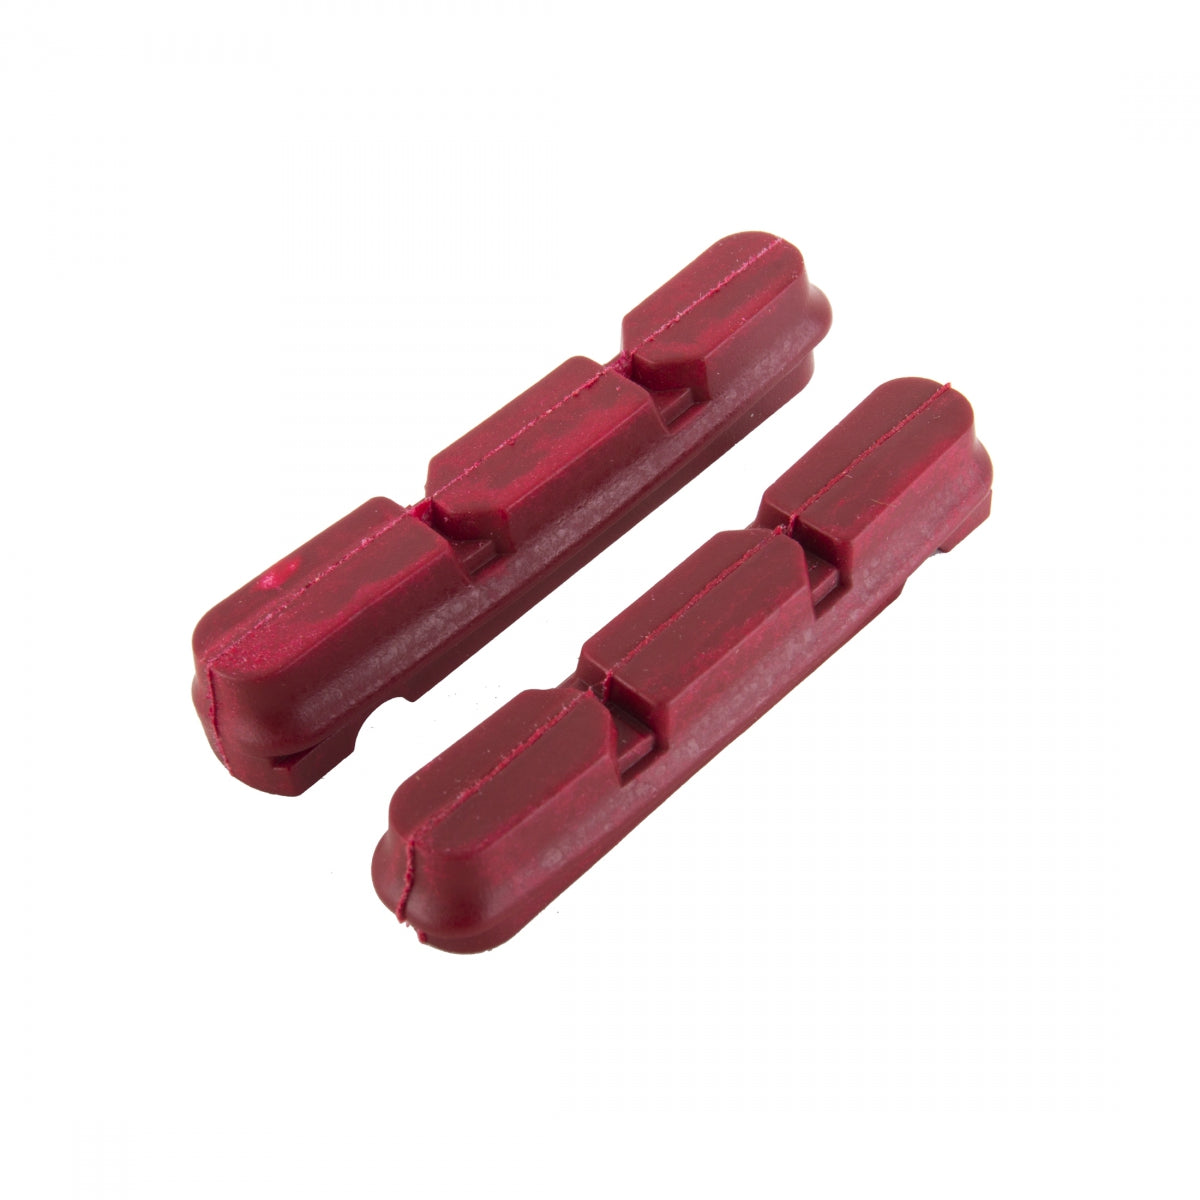 Kool Stop Dura 2 Road Pad Inserts for Carbon Rims, Red